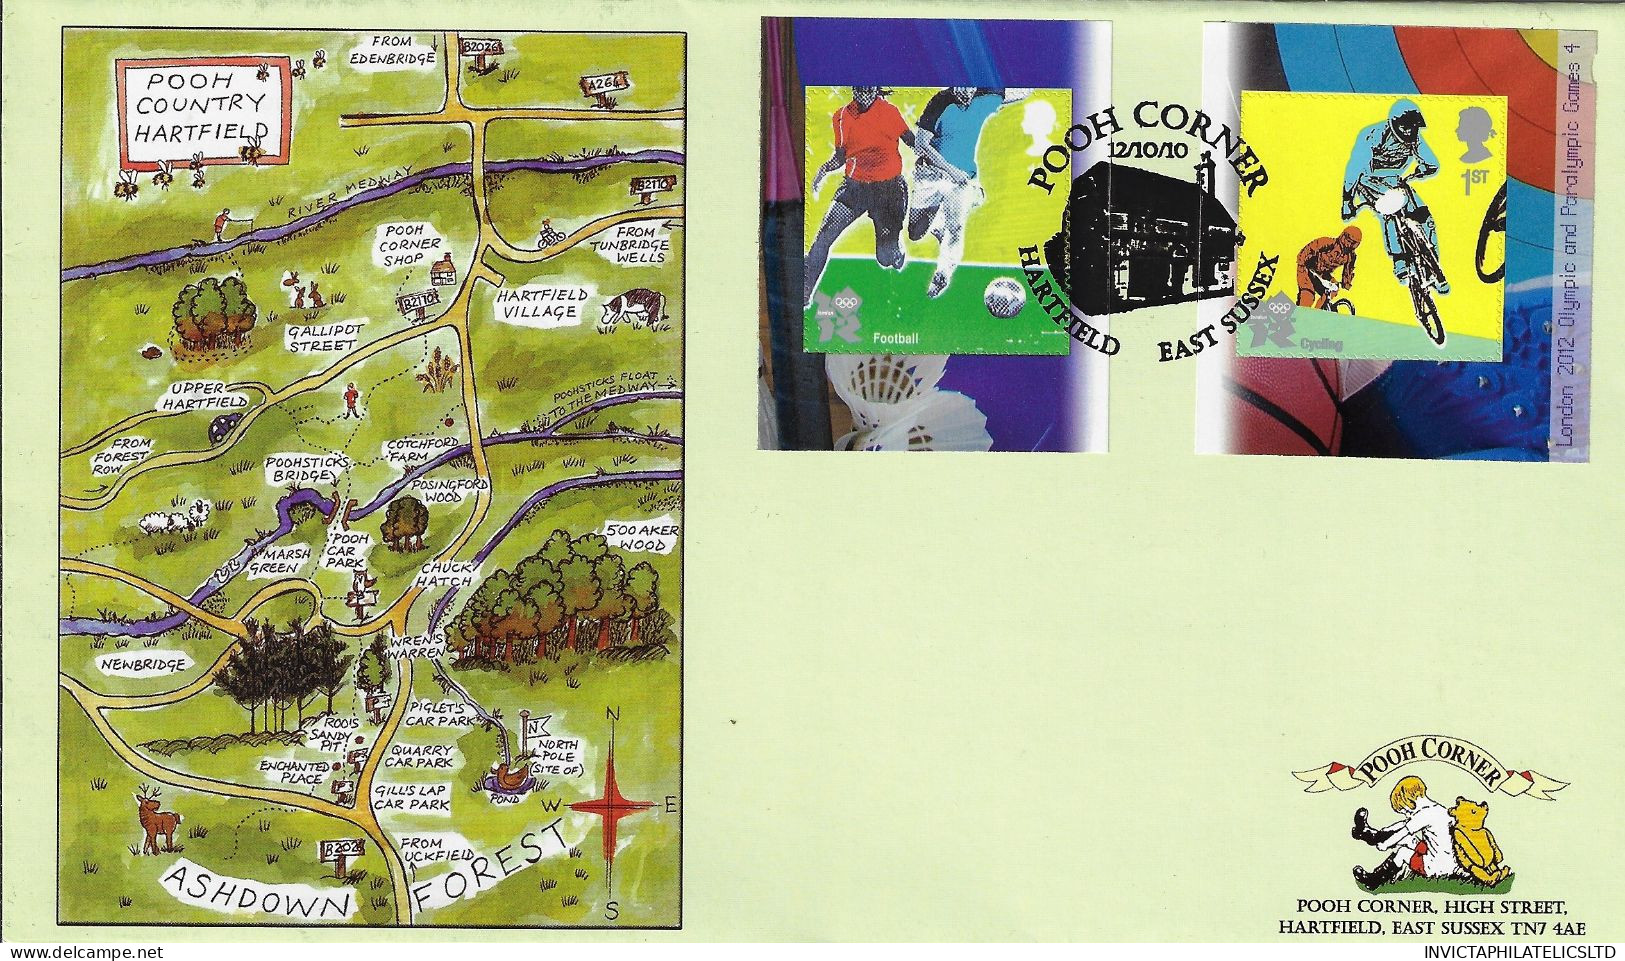 GB 2010 OLYMPIC GAMES NVI BOOKLET NO 4, VERY SCARCE POOH COUNTRY MAP FDC, FEW EXIST - 2001-2010 Decimal Issues